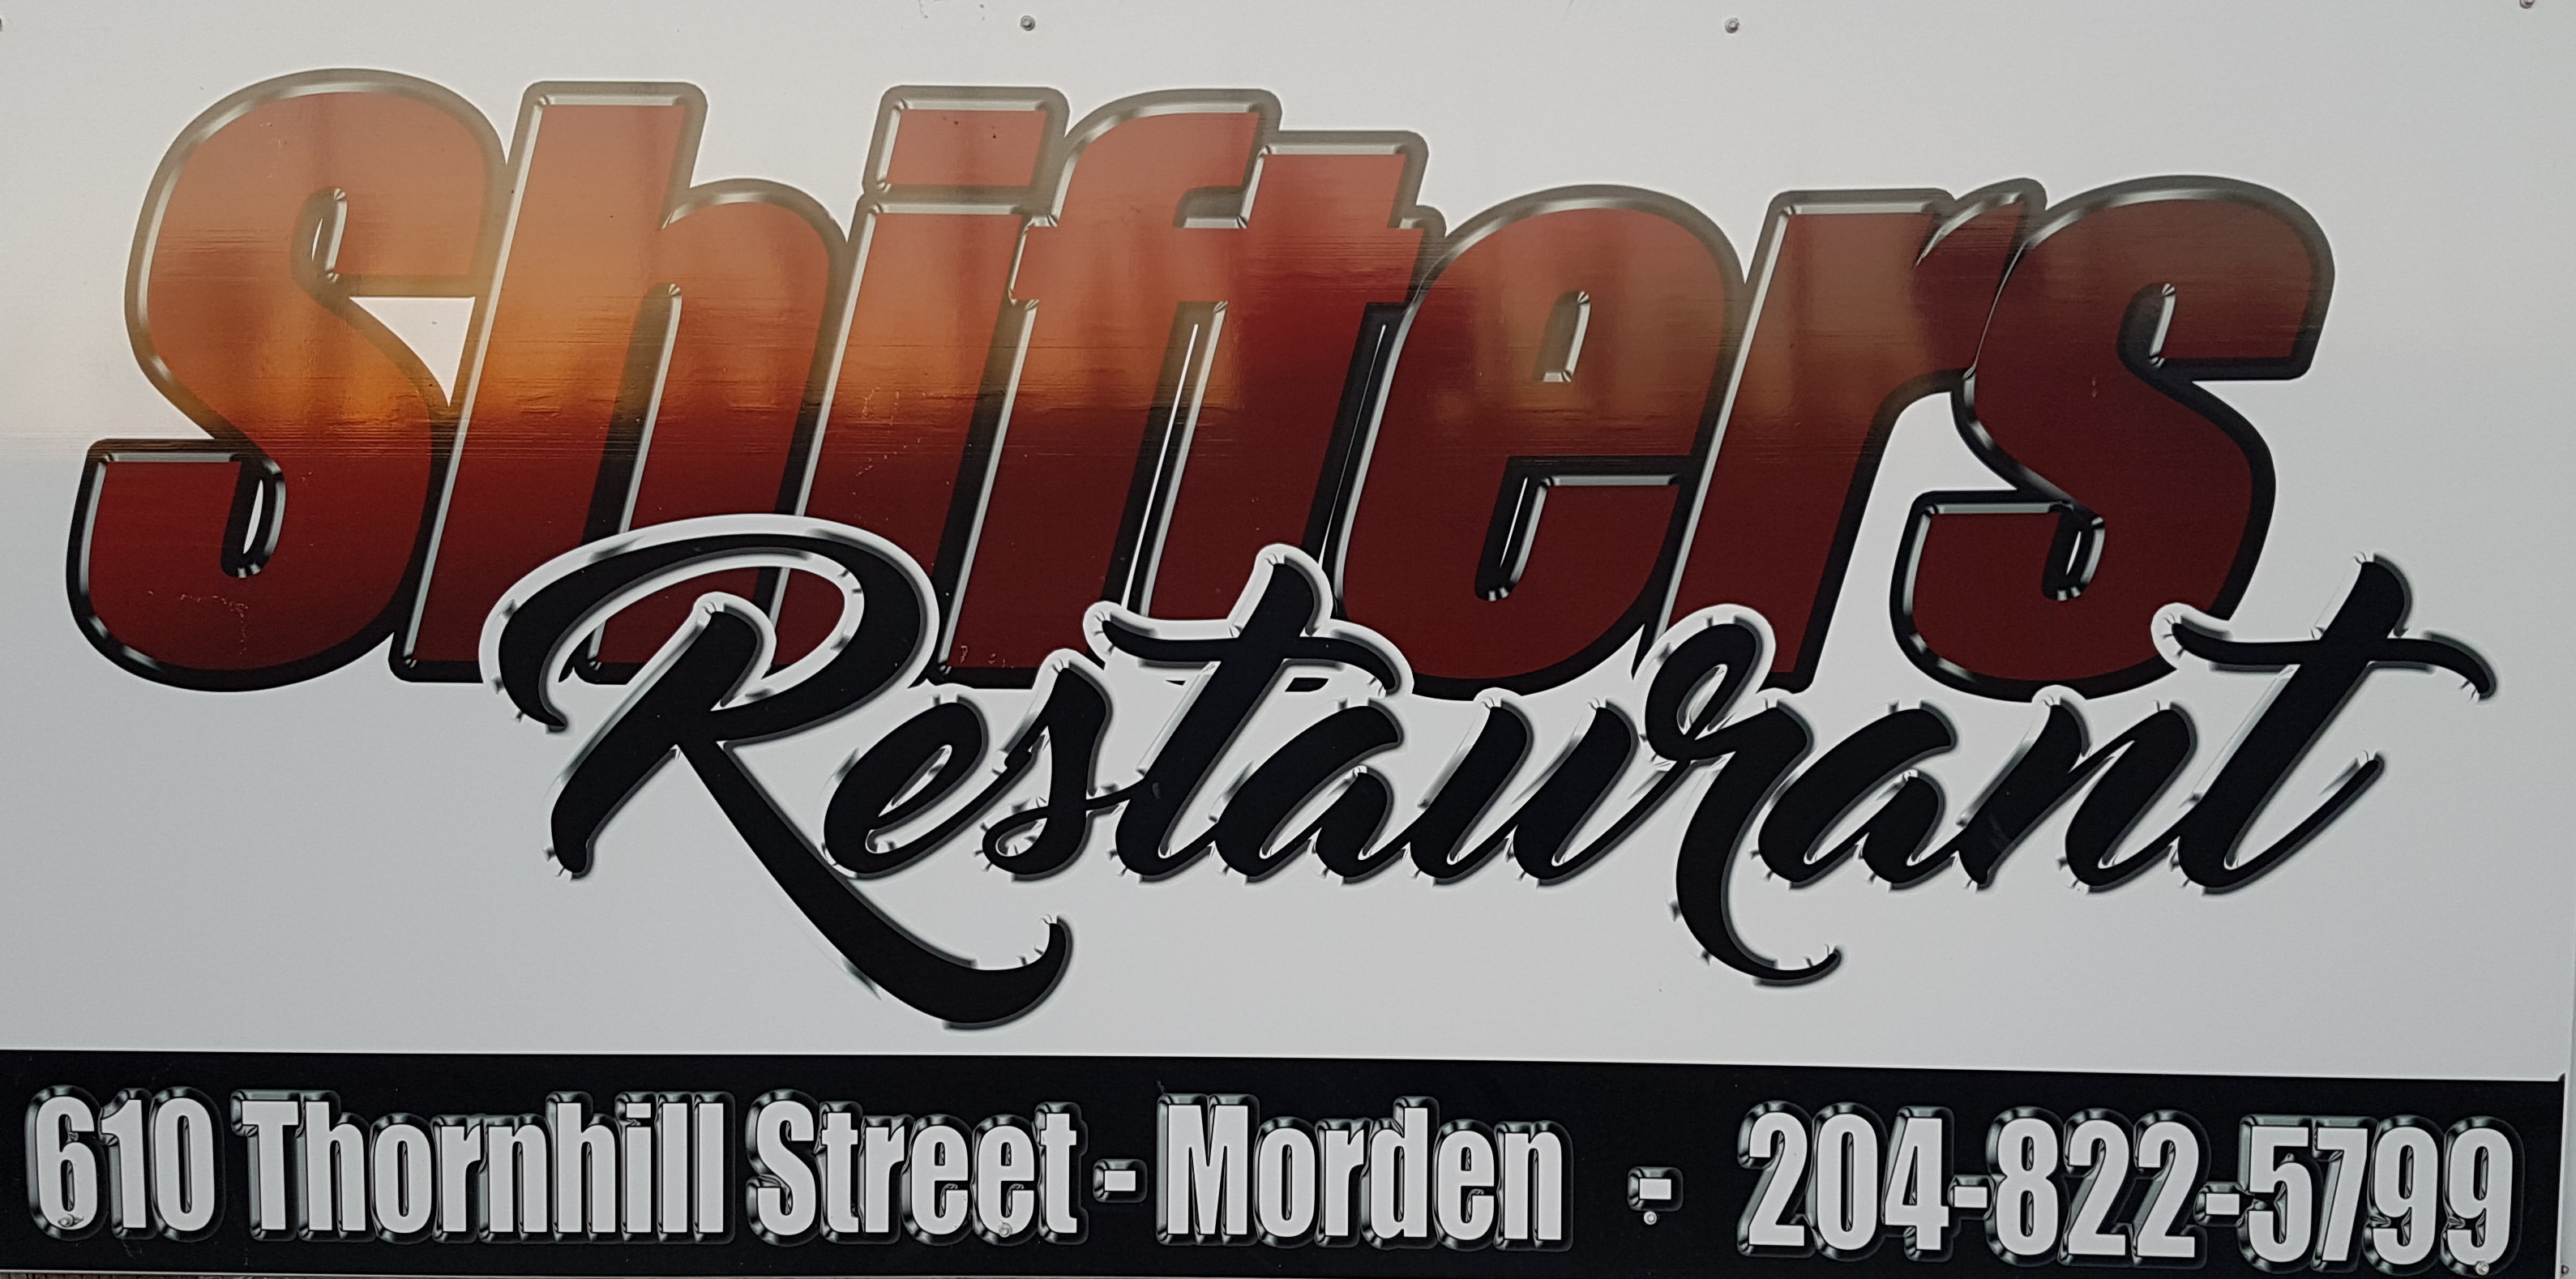 SHIFTERS STEAKHOUSE